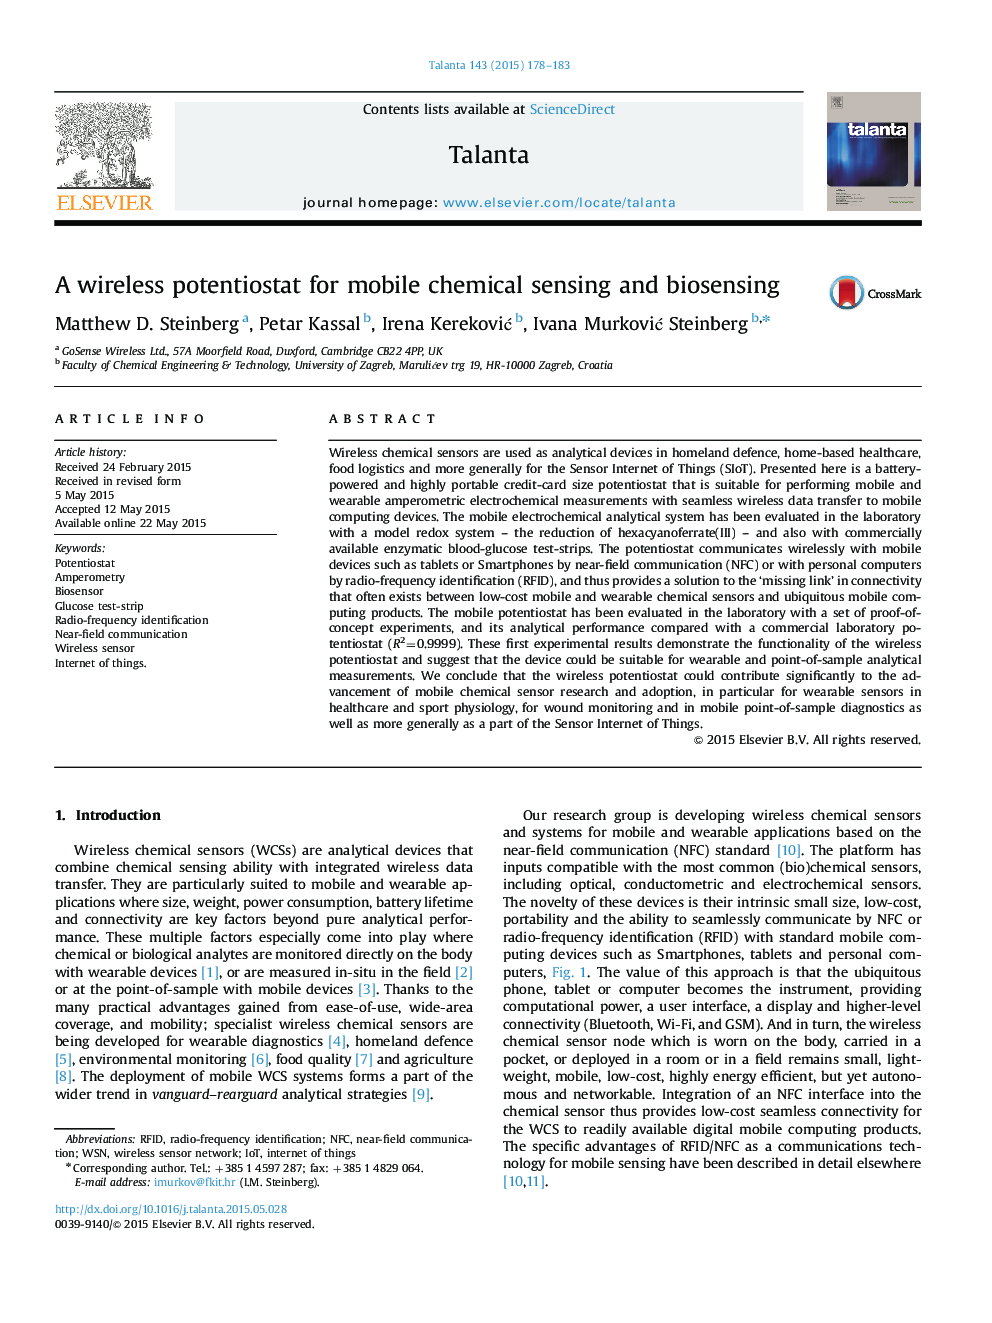 A wireless potentiostat for mobile chemical sensing and biosensing